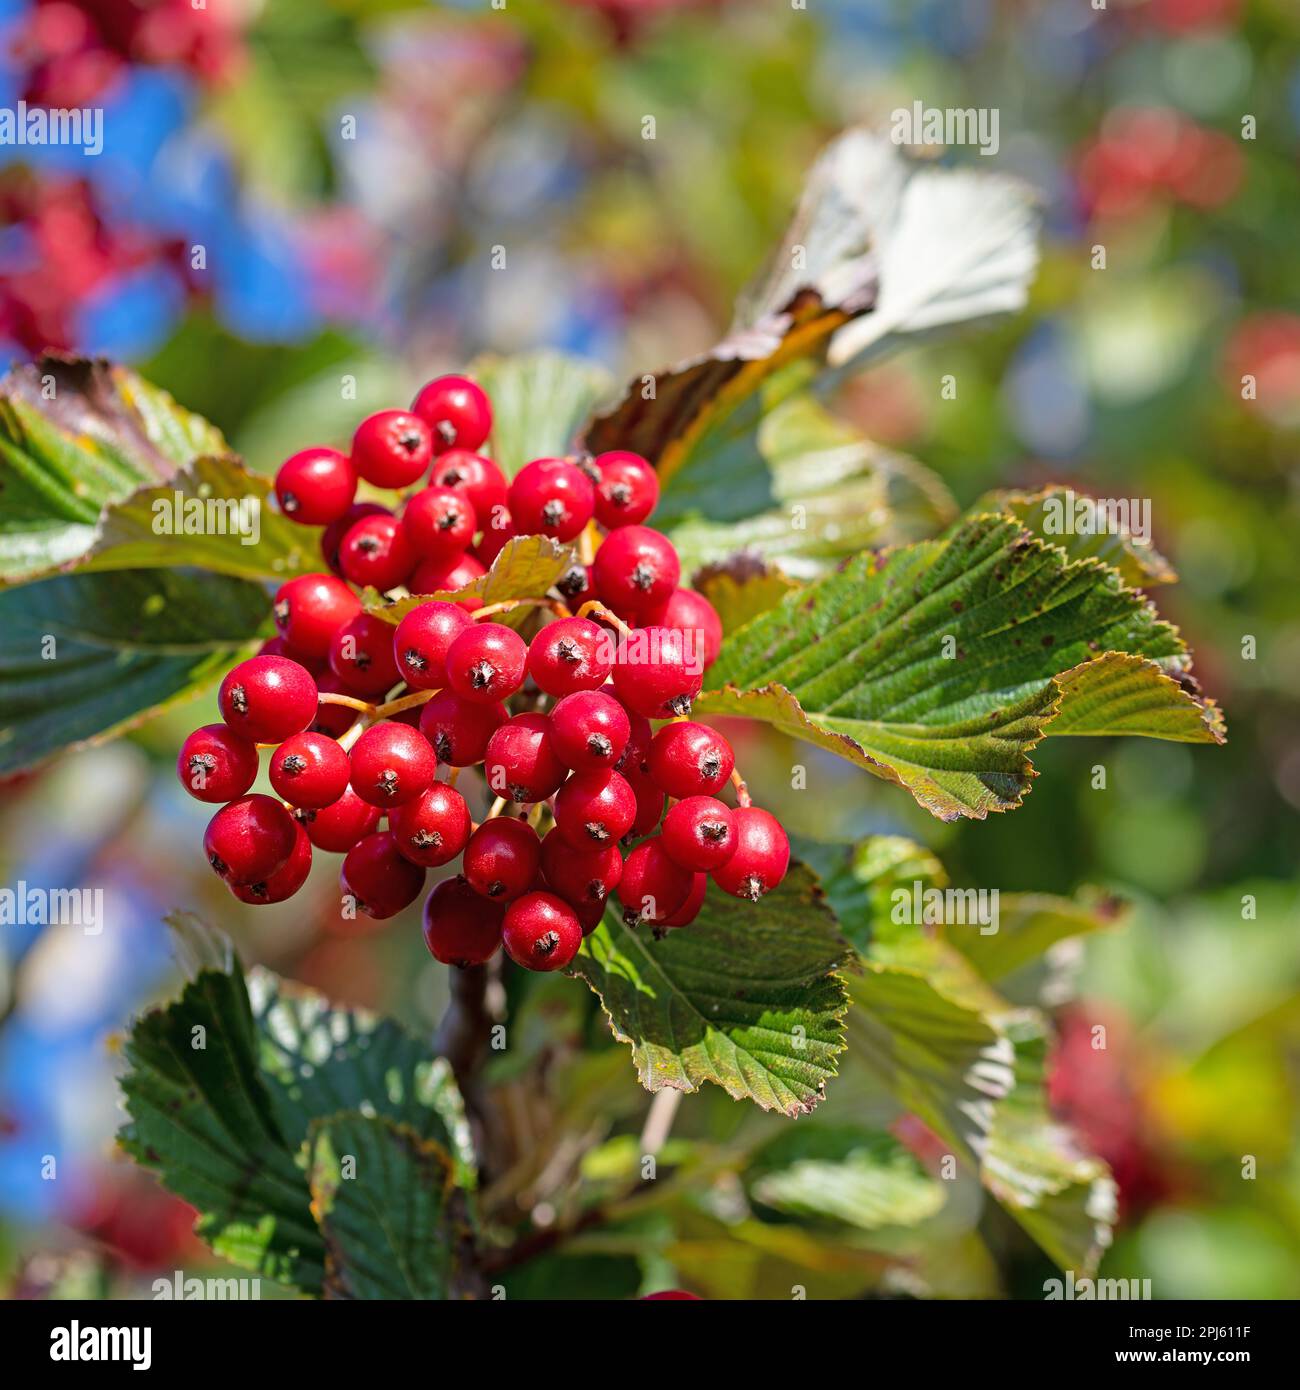 Fruits from the mealberry tree in a close-up Stock Photo